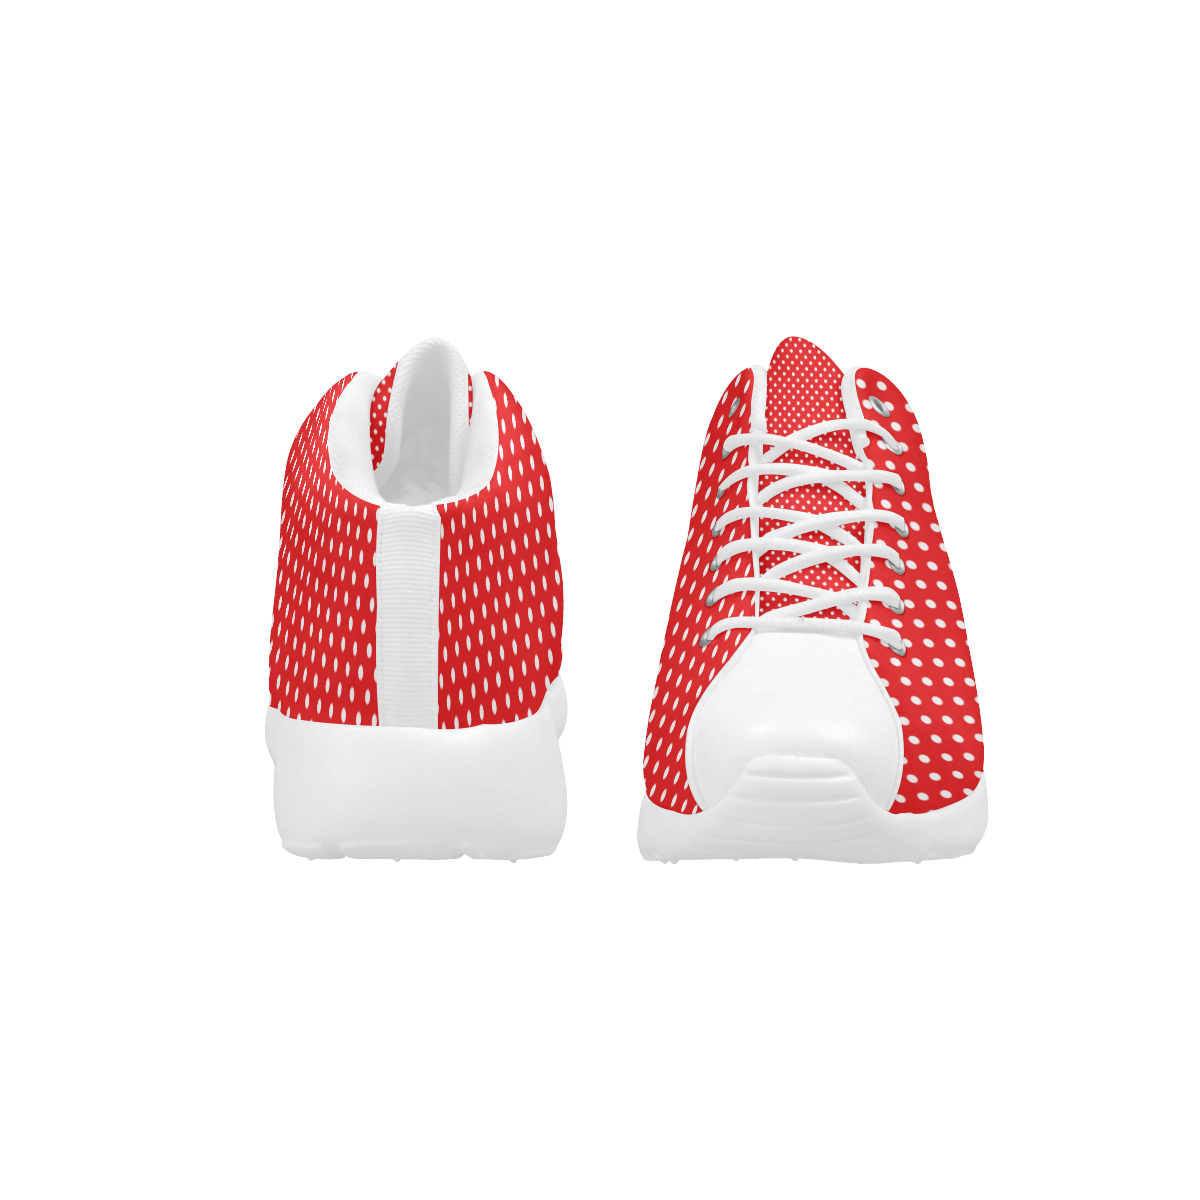 Red polka dots Women's Basketball Training Shoes/Large Size (Model 47502)